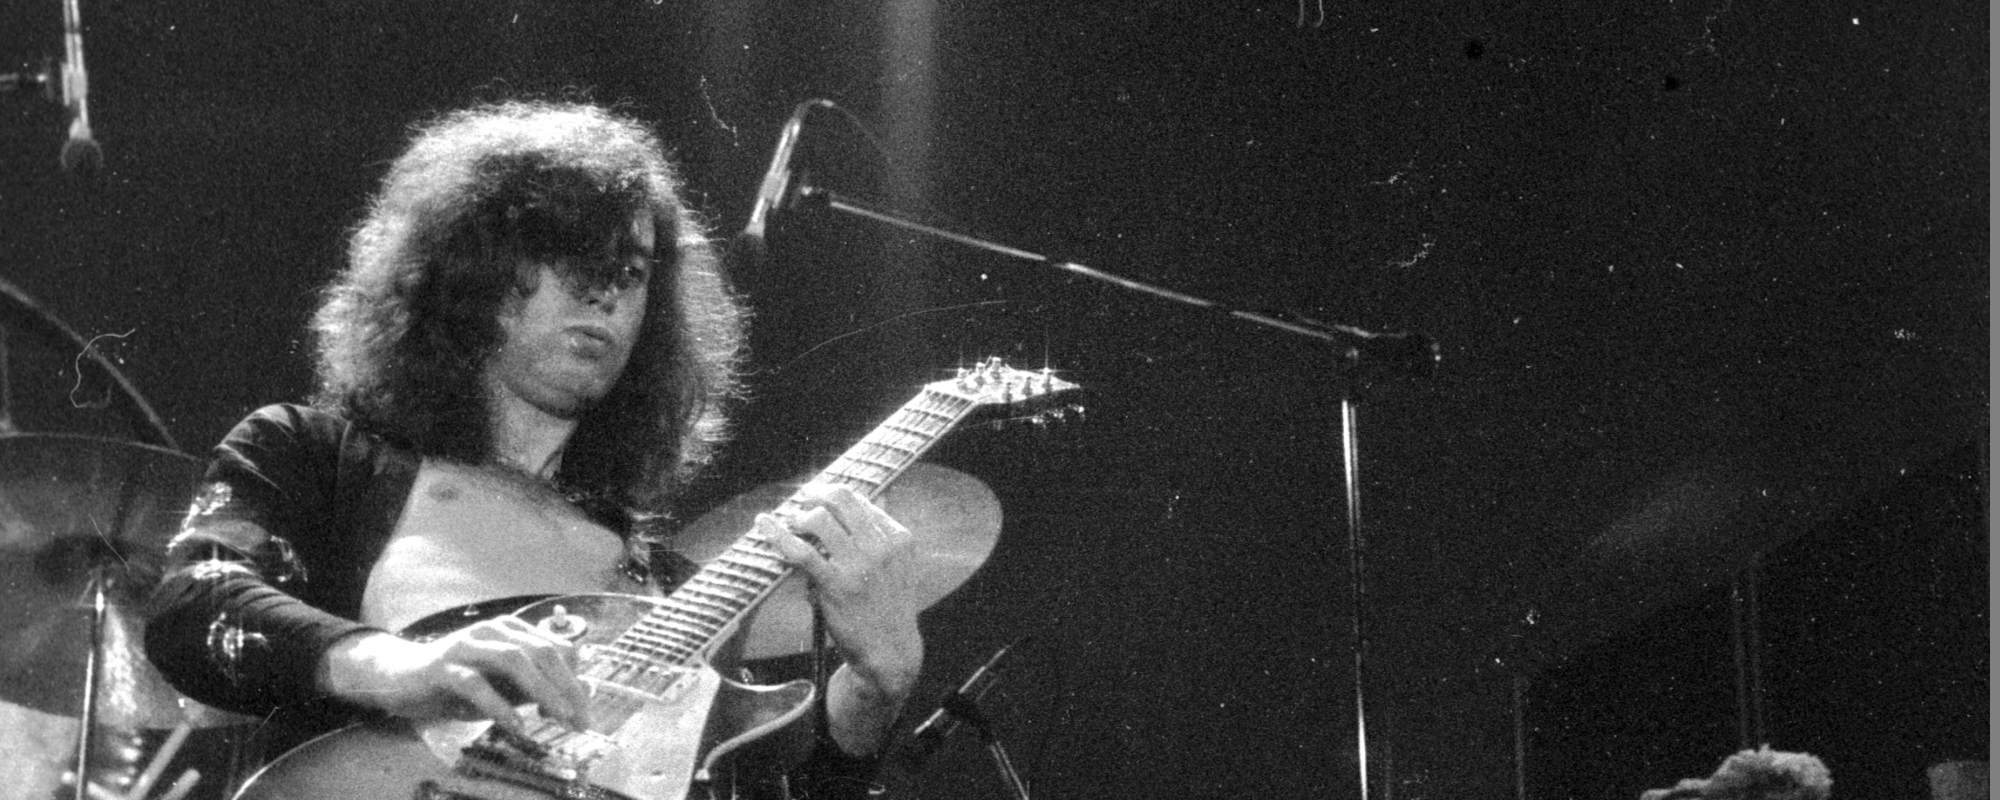 Jimmy Page’s Top 5 Guitar Solos with Led Zeppelin: From “Stairway to Heaven” to “Communication Breakdown”